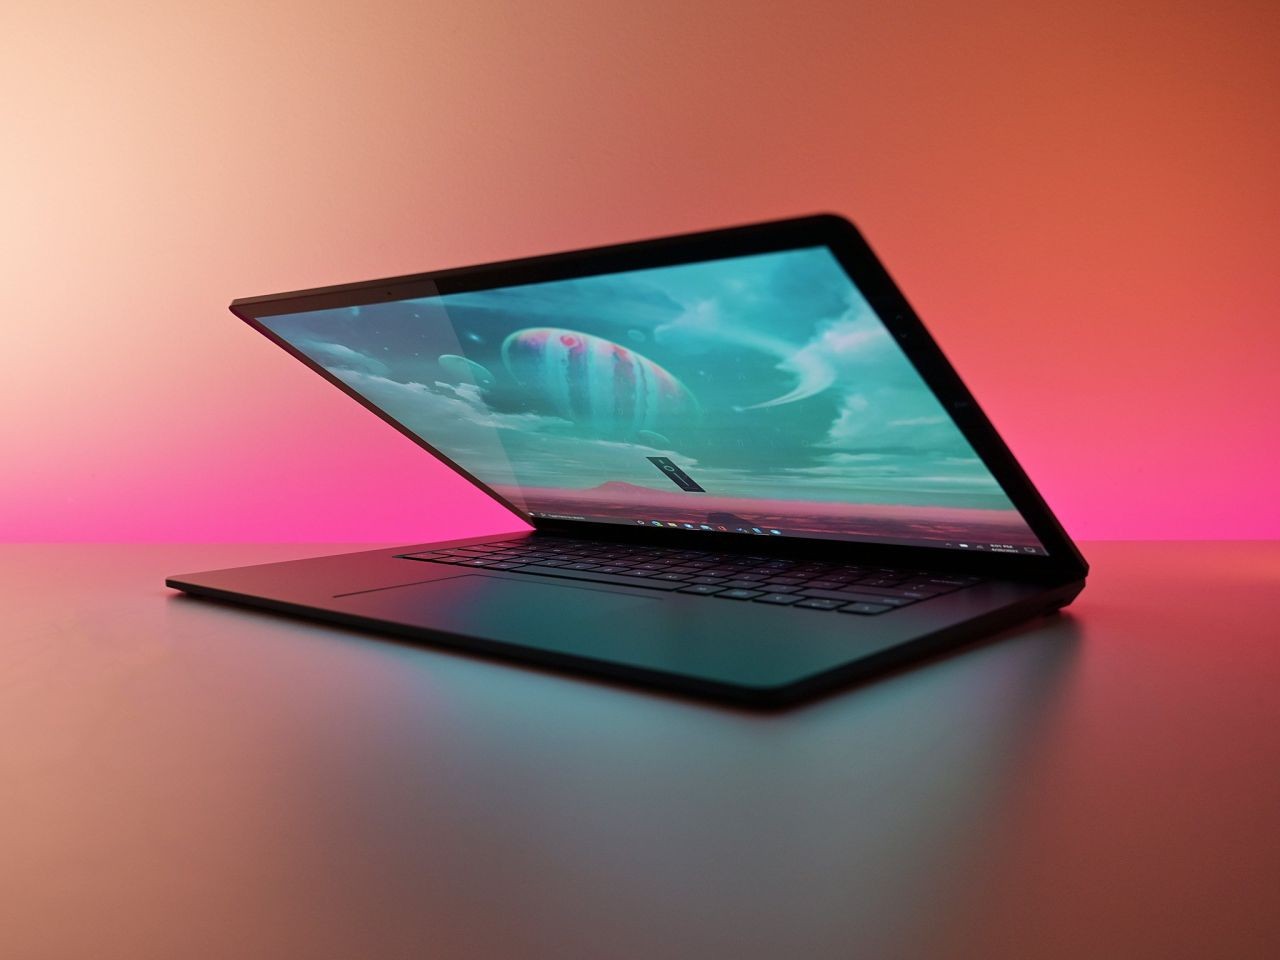 Microsoft's next Surface event is around the corner, but you can save more than $200 on a Surface Laptop 4 right now